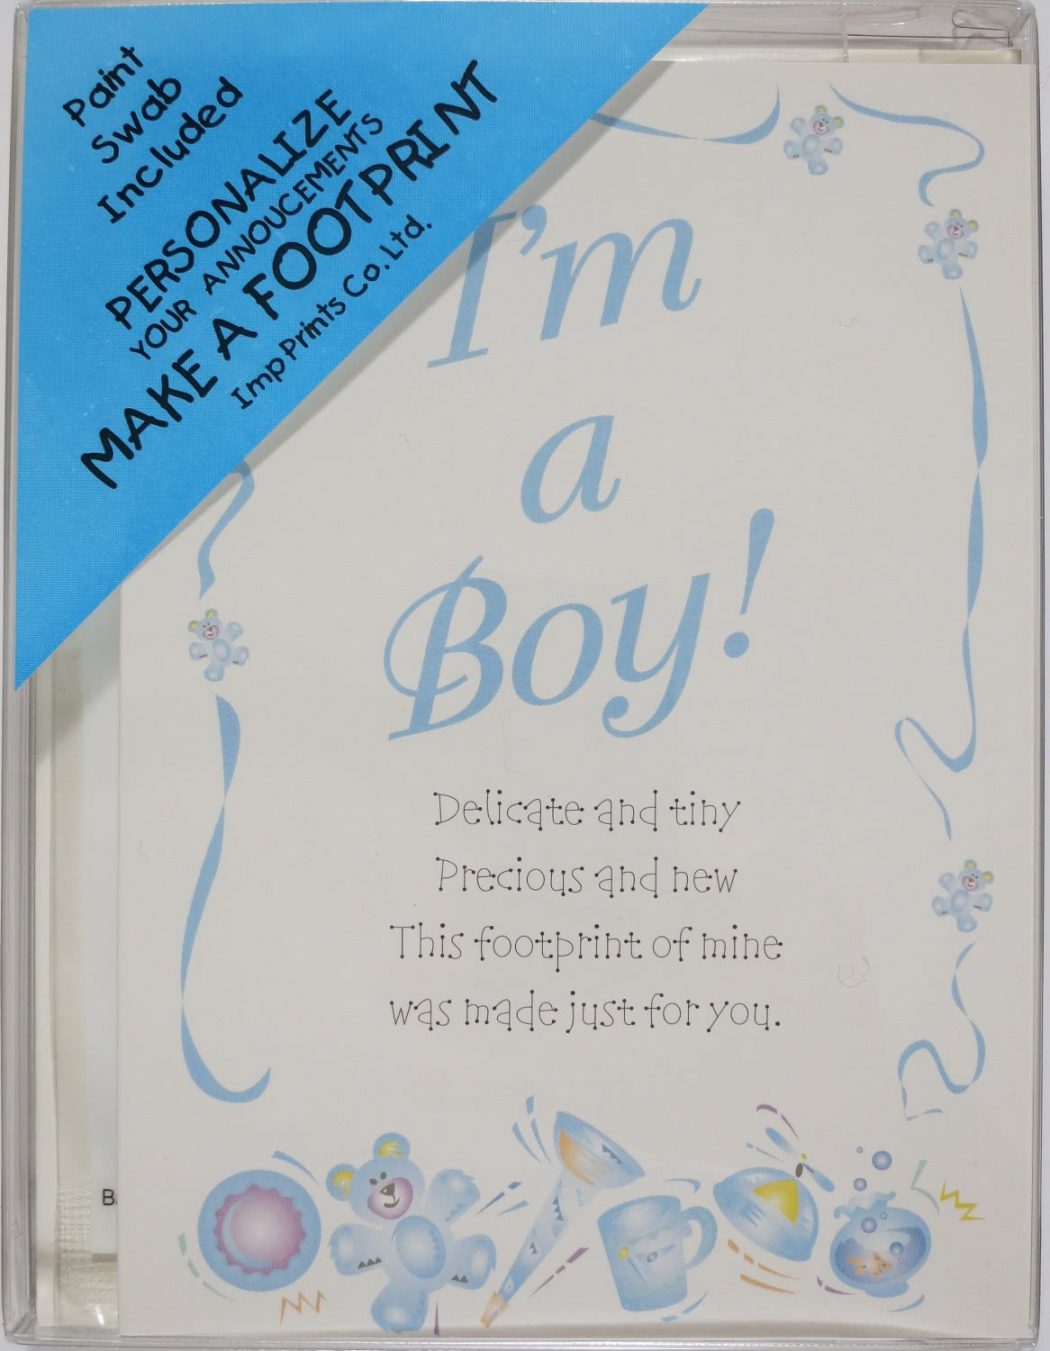 A plastic box containing Imp Prints Co Birth Announcement Cards for Boys. Inside a whimsical purple border it says "I'm a Boy!" Underneath is a poem "Our precious baby, Delicate and tiny, Precious and new, This footprint of mine was made just for you